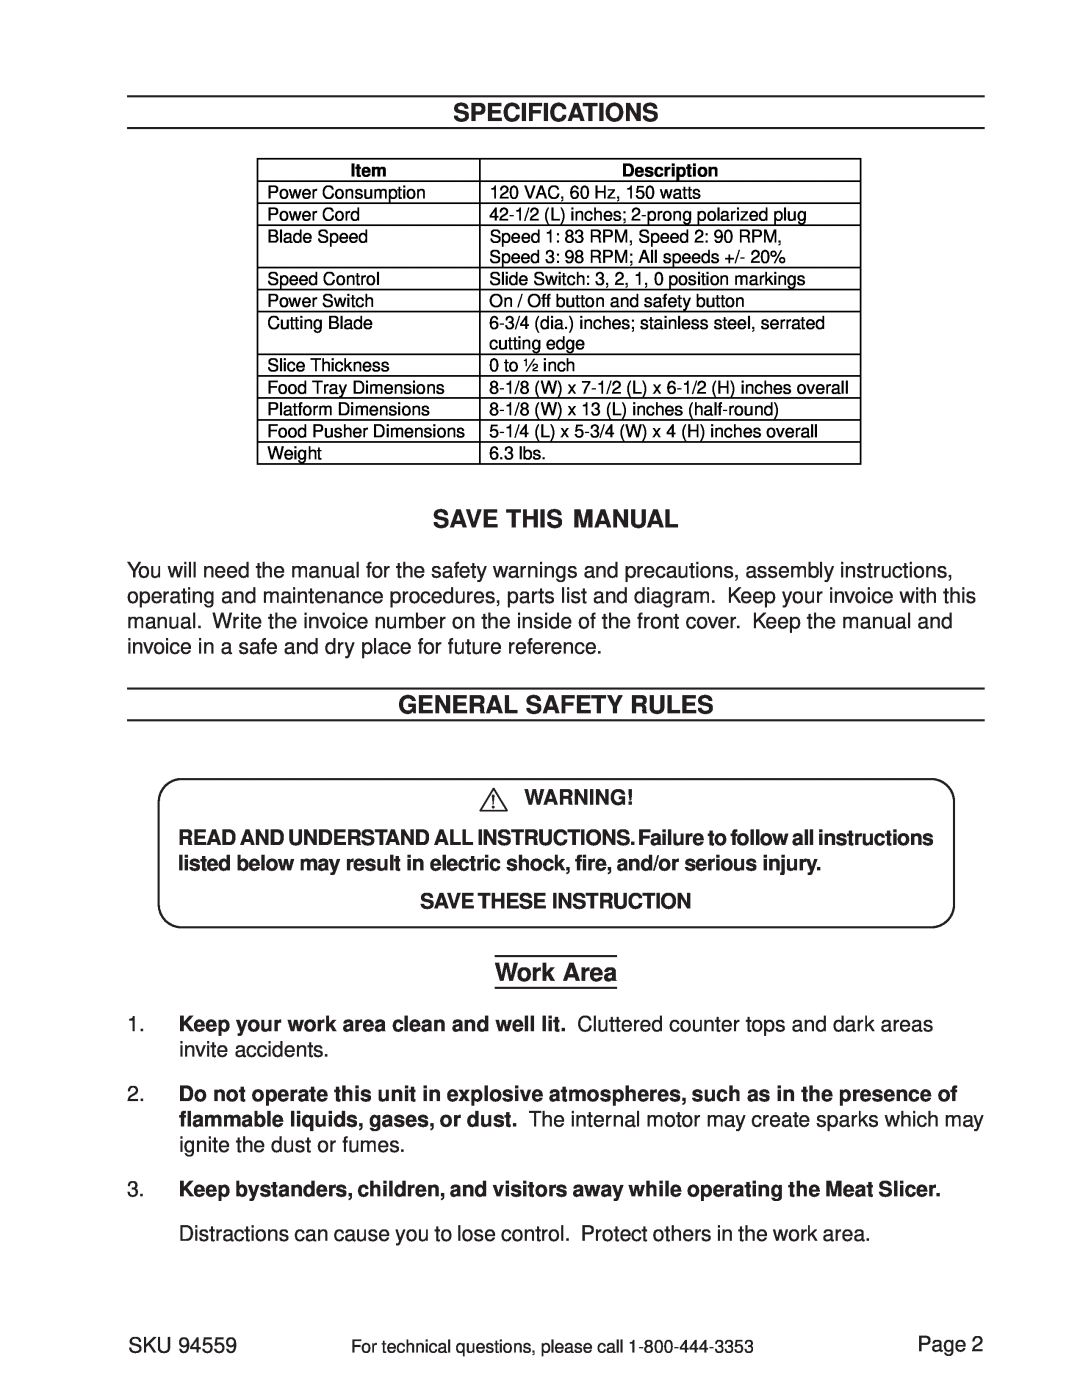 Harbor Freight Tools 94559 manual Specifications, Save This Manual, General Safety Rules, Work Area, Save These Instruction 